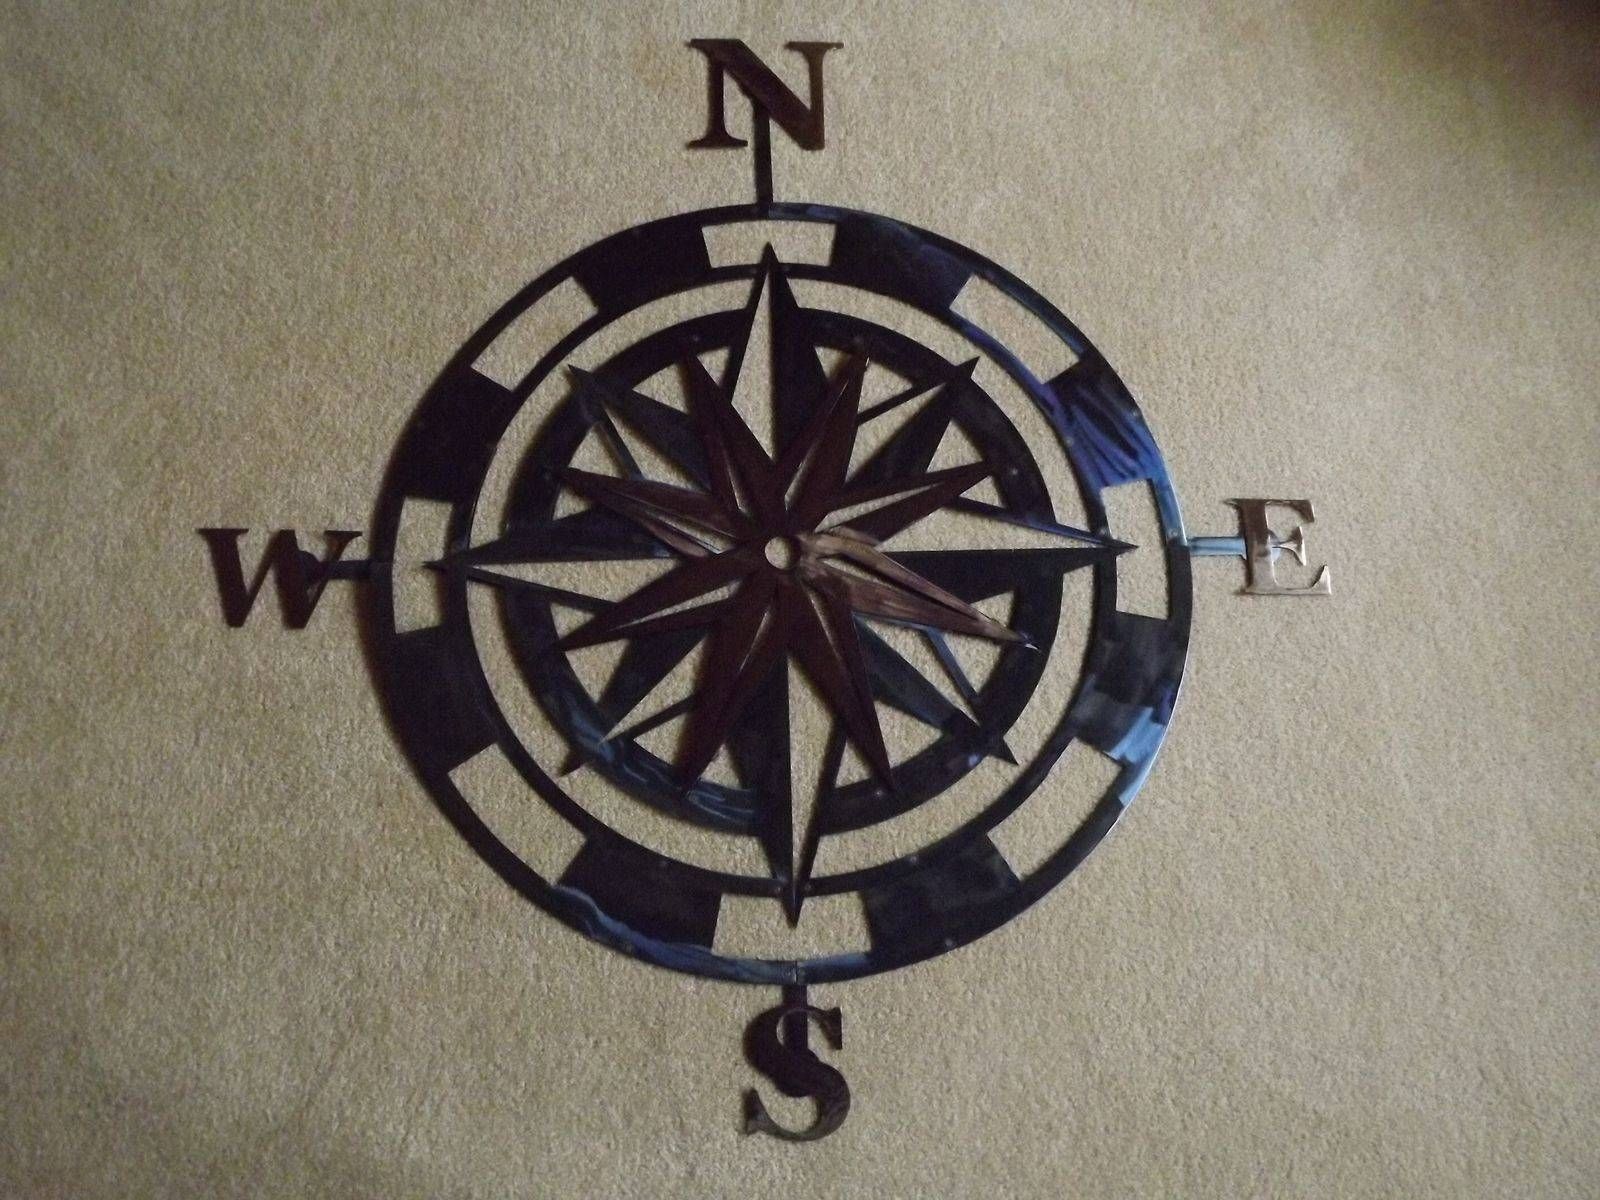 Wall Art Design Ideas: Handmade Rose Compass Wall Art Metal Intended For Most Current Stainless Steel Outdoor Wall Art (View 17 of 20)